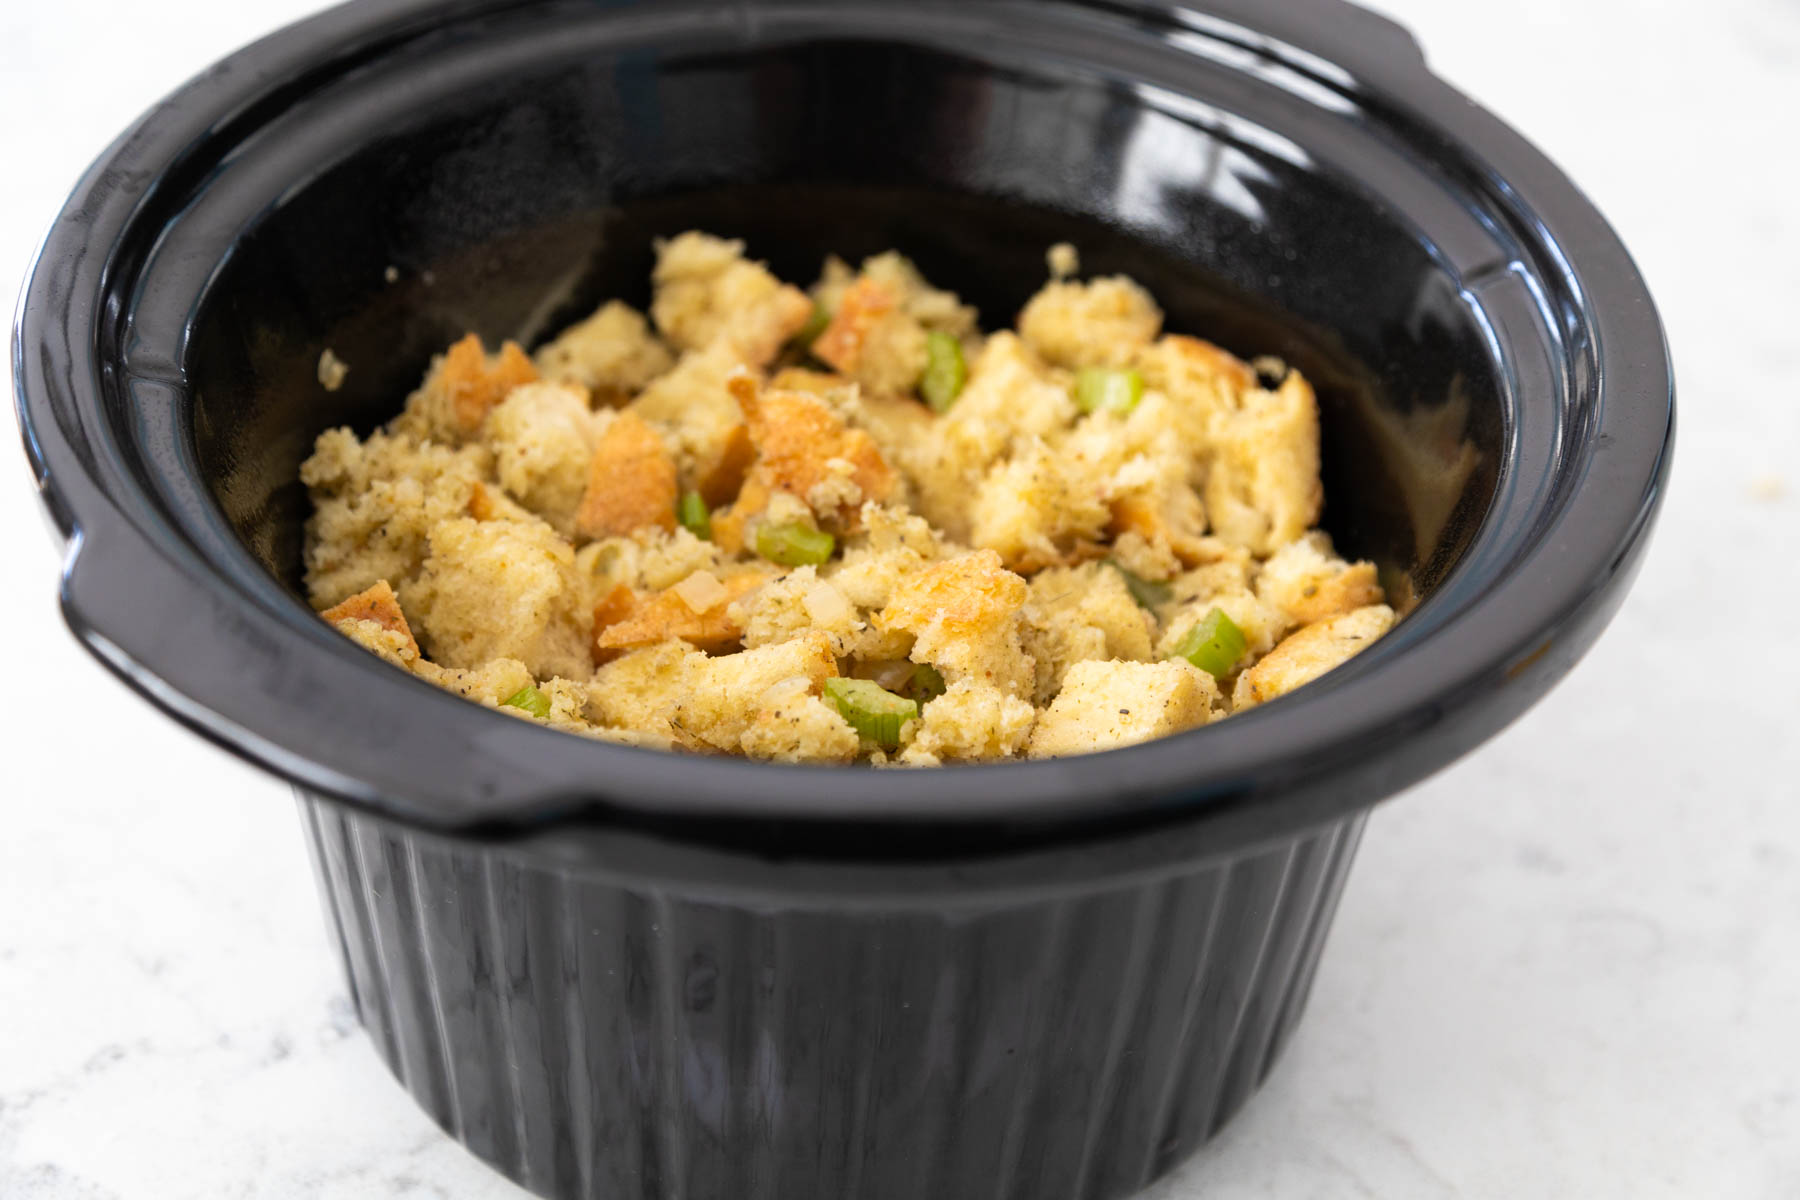 The stuffing mixture has been spooned into the bowl of a slowcooker.